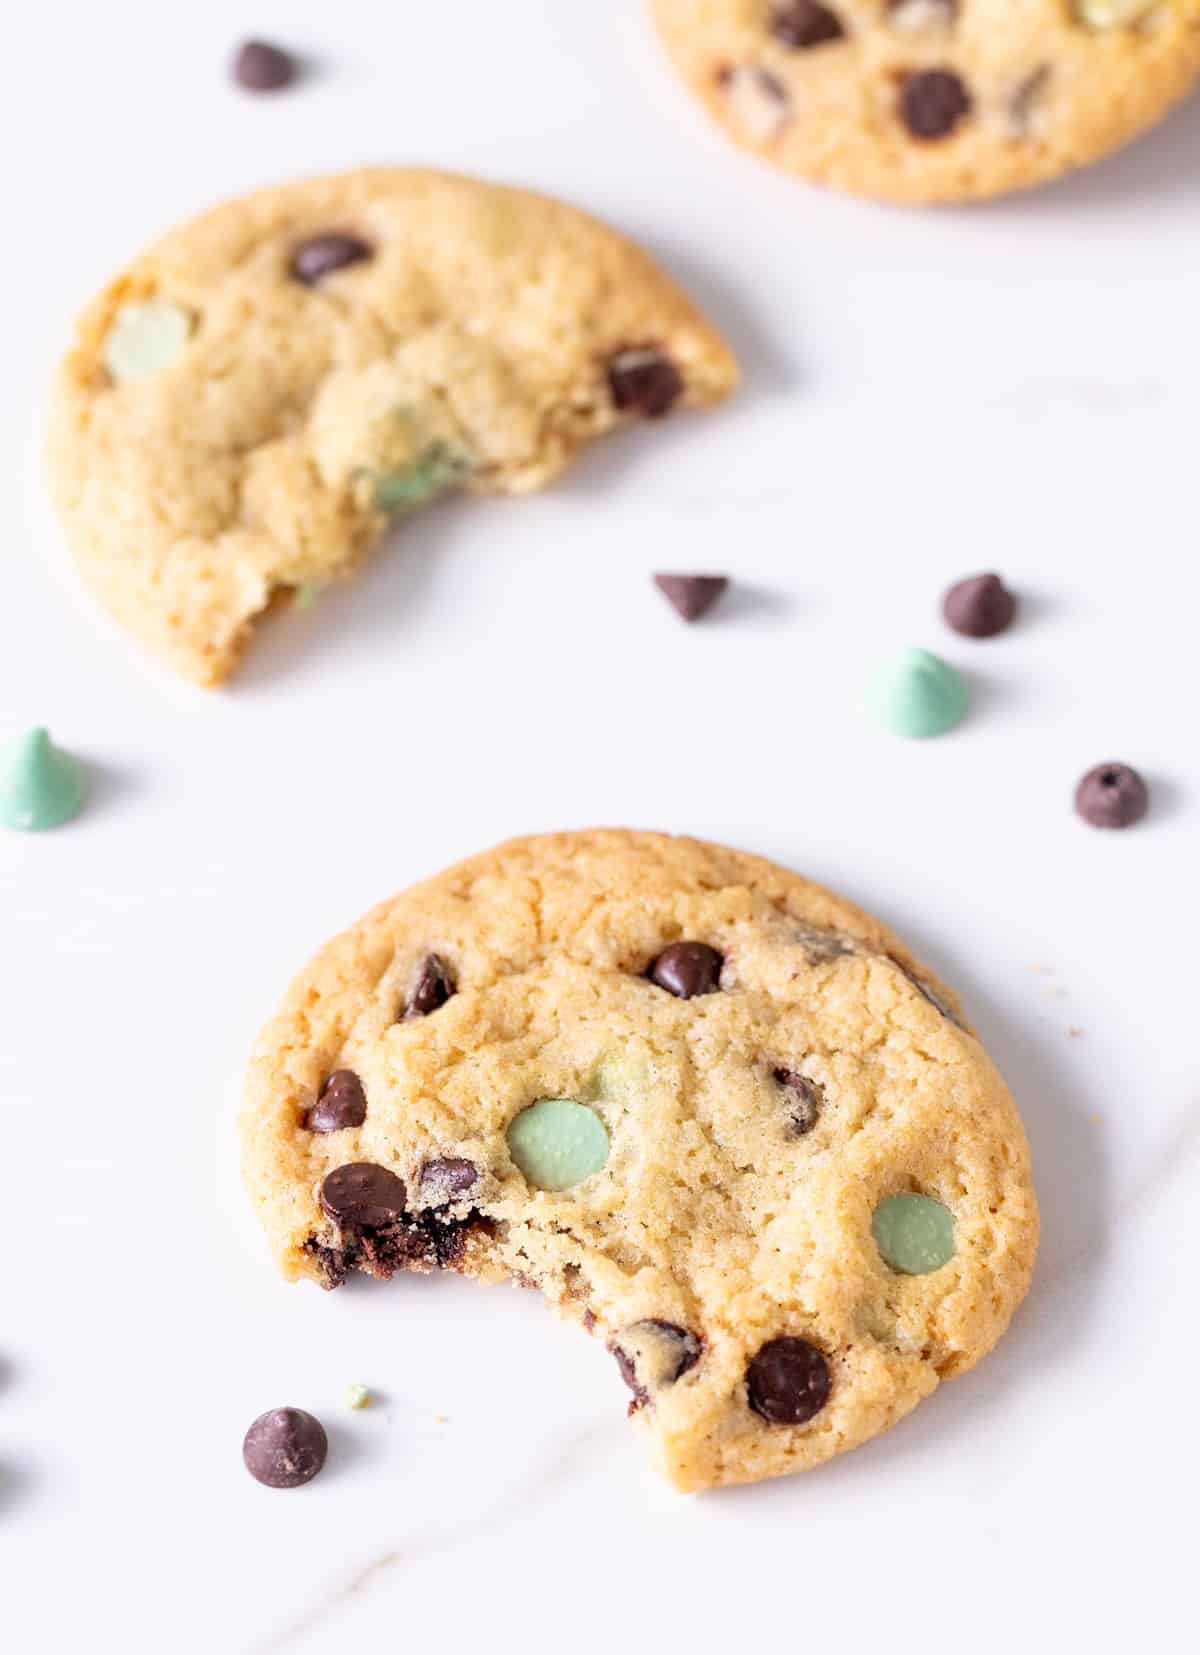 Top view of bitten mint chocolate chip cookies on white marble surface